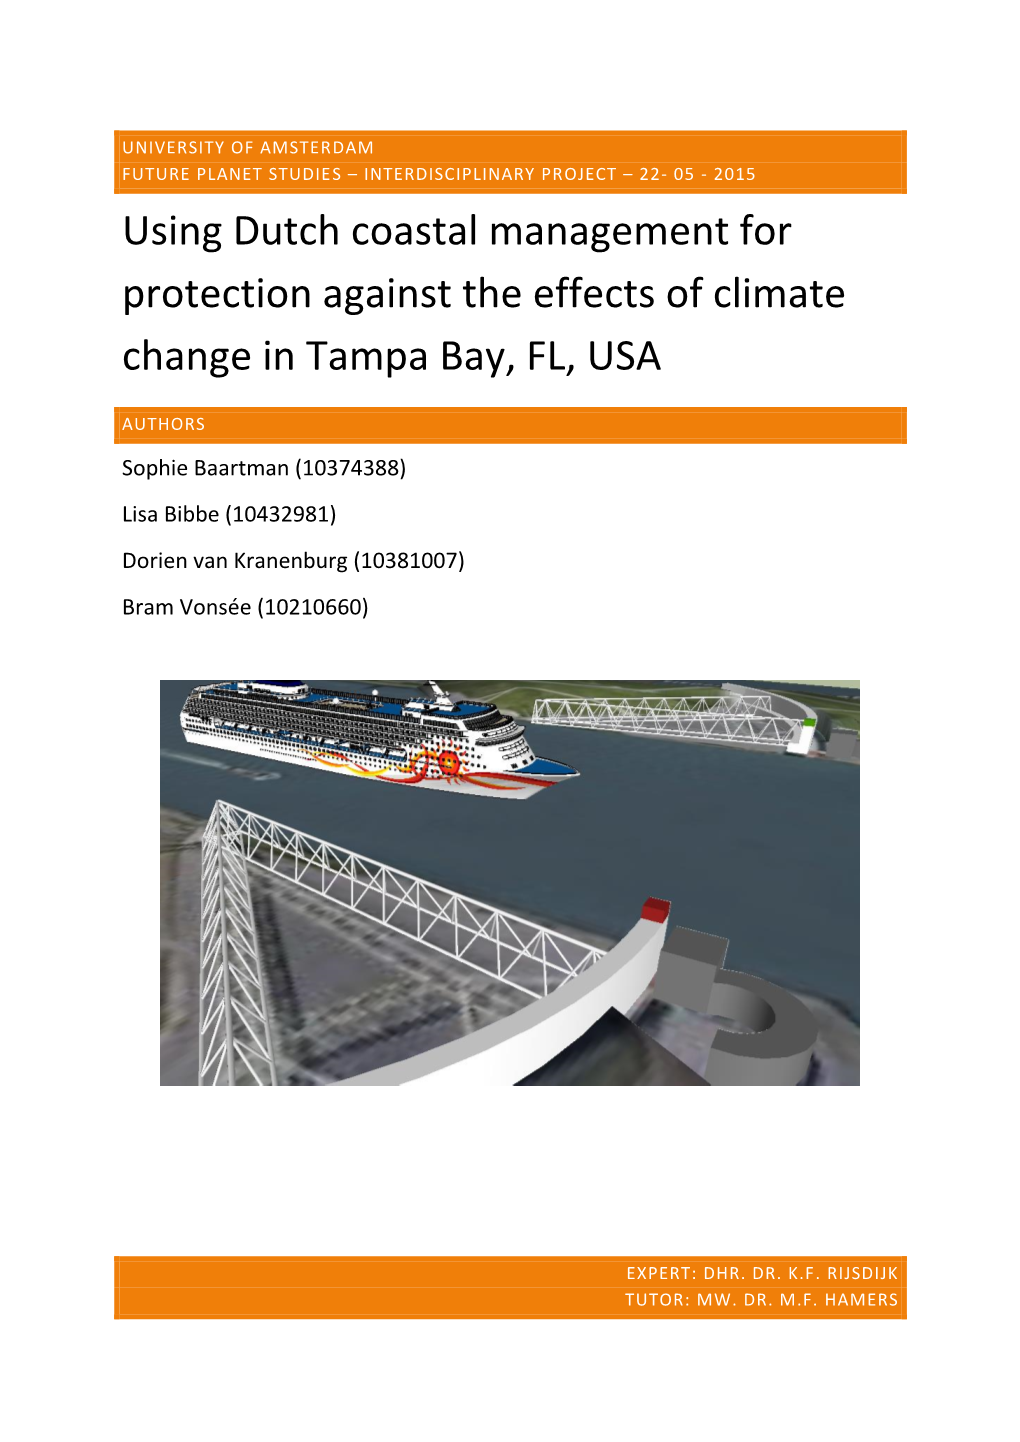 Using Dutch Coastal Management for Protection Against the Effects of Climate Change in Tampa Bay, FL, USA